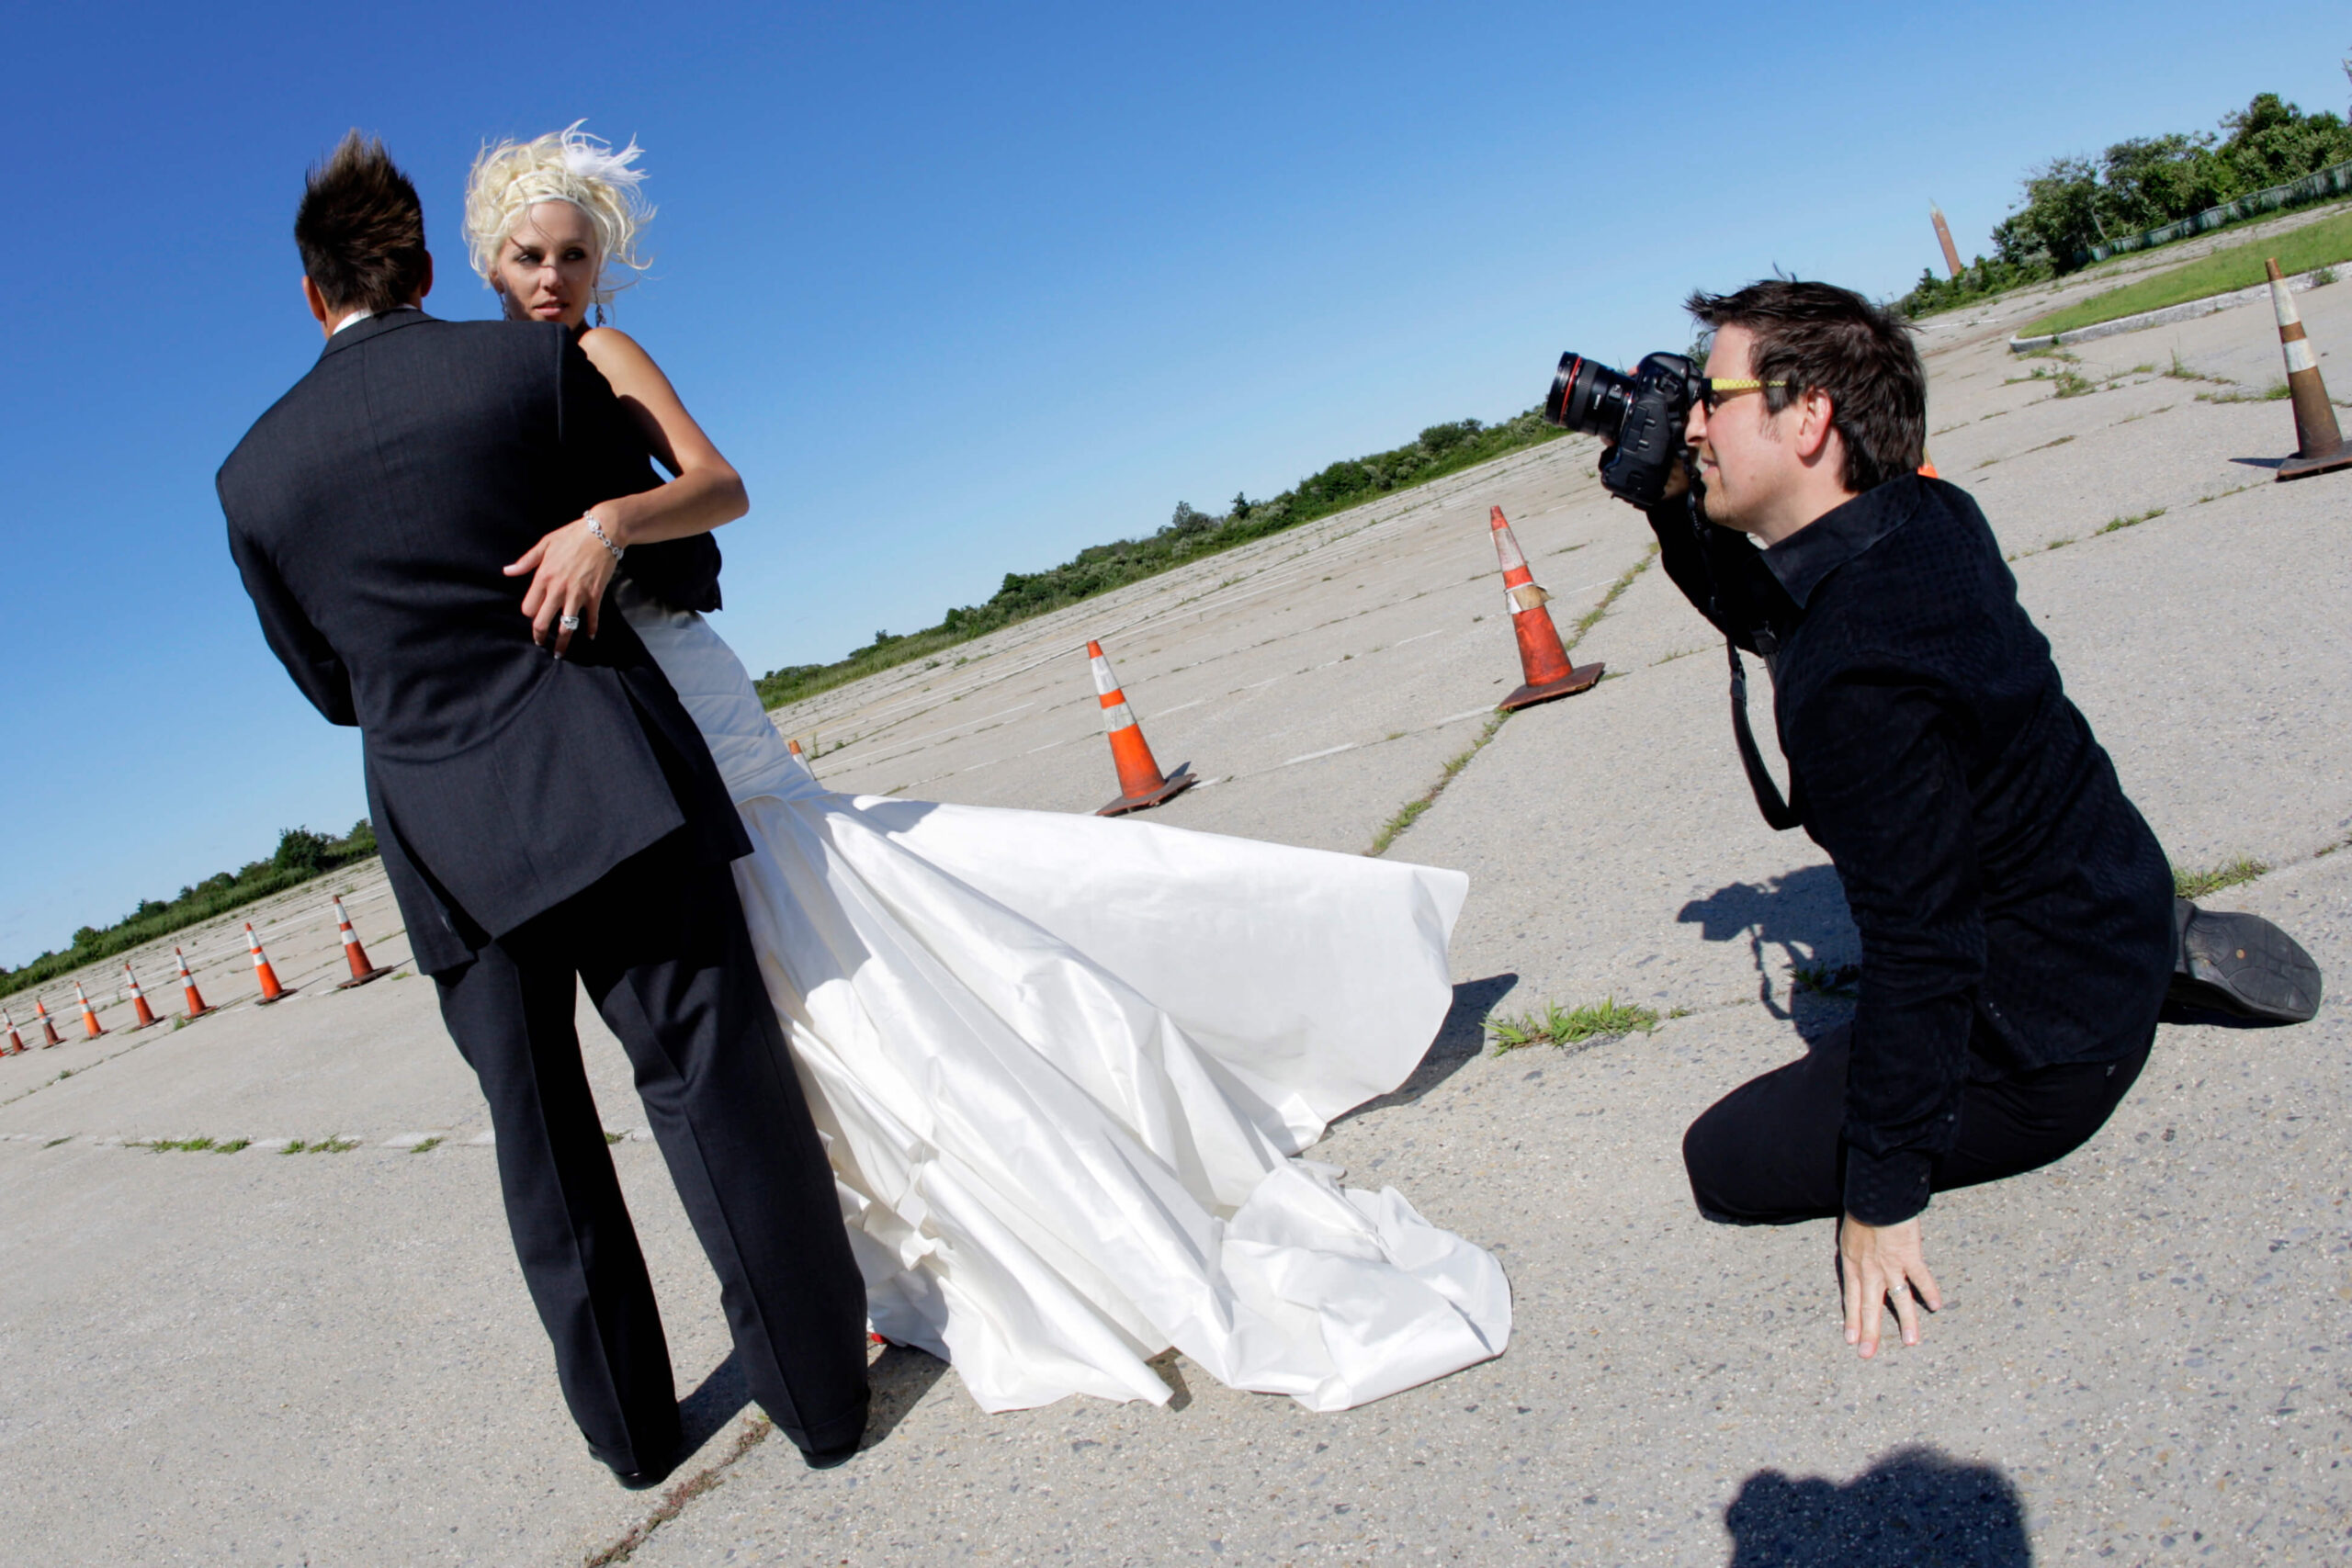 a photographer taking a picture of a woman in a wedding dress and man in suit